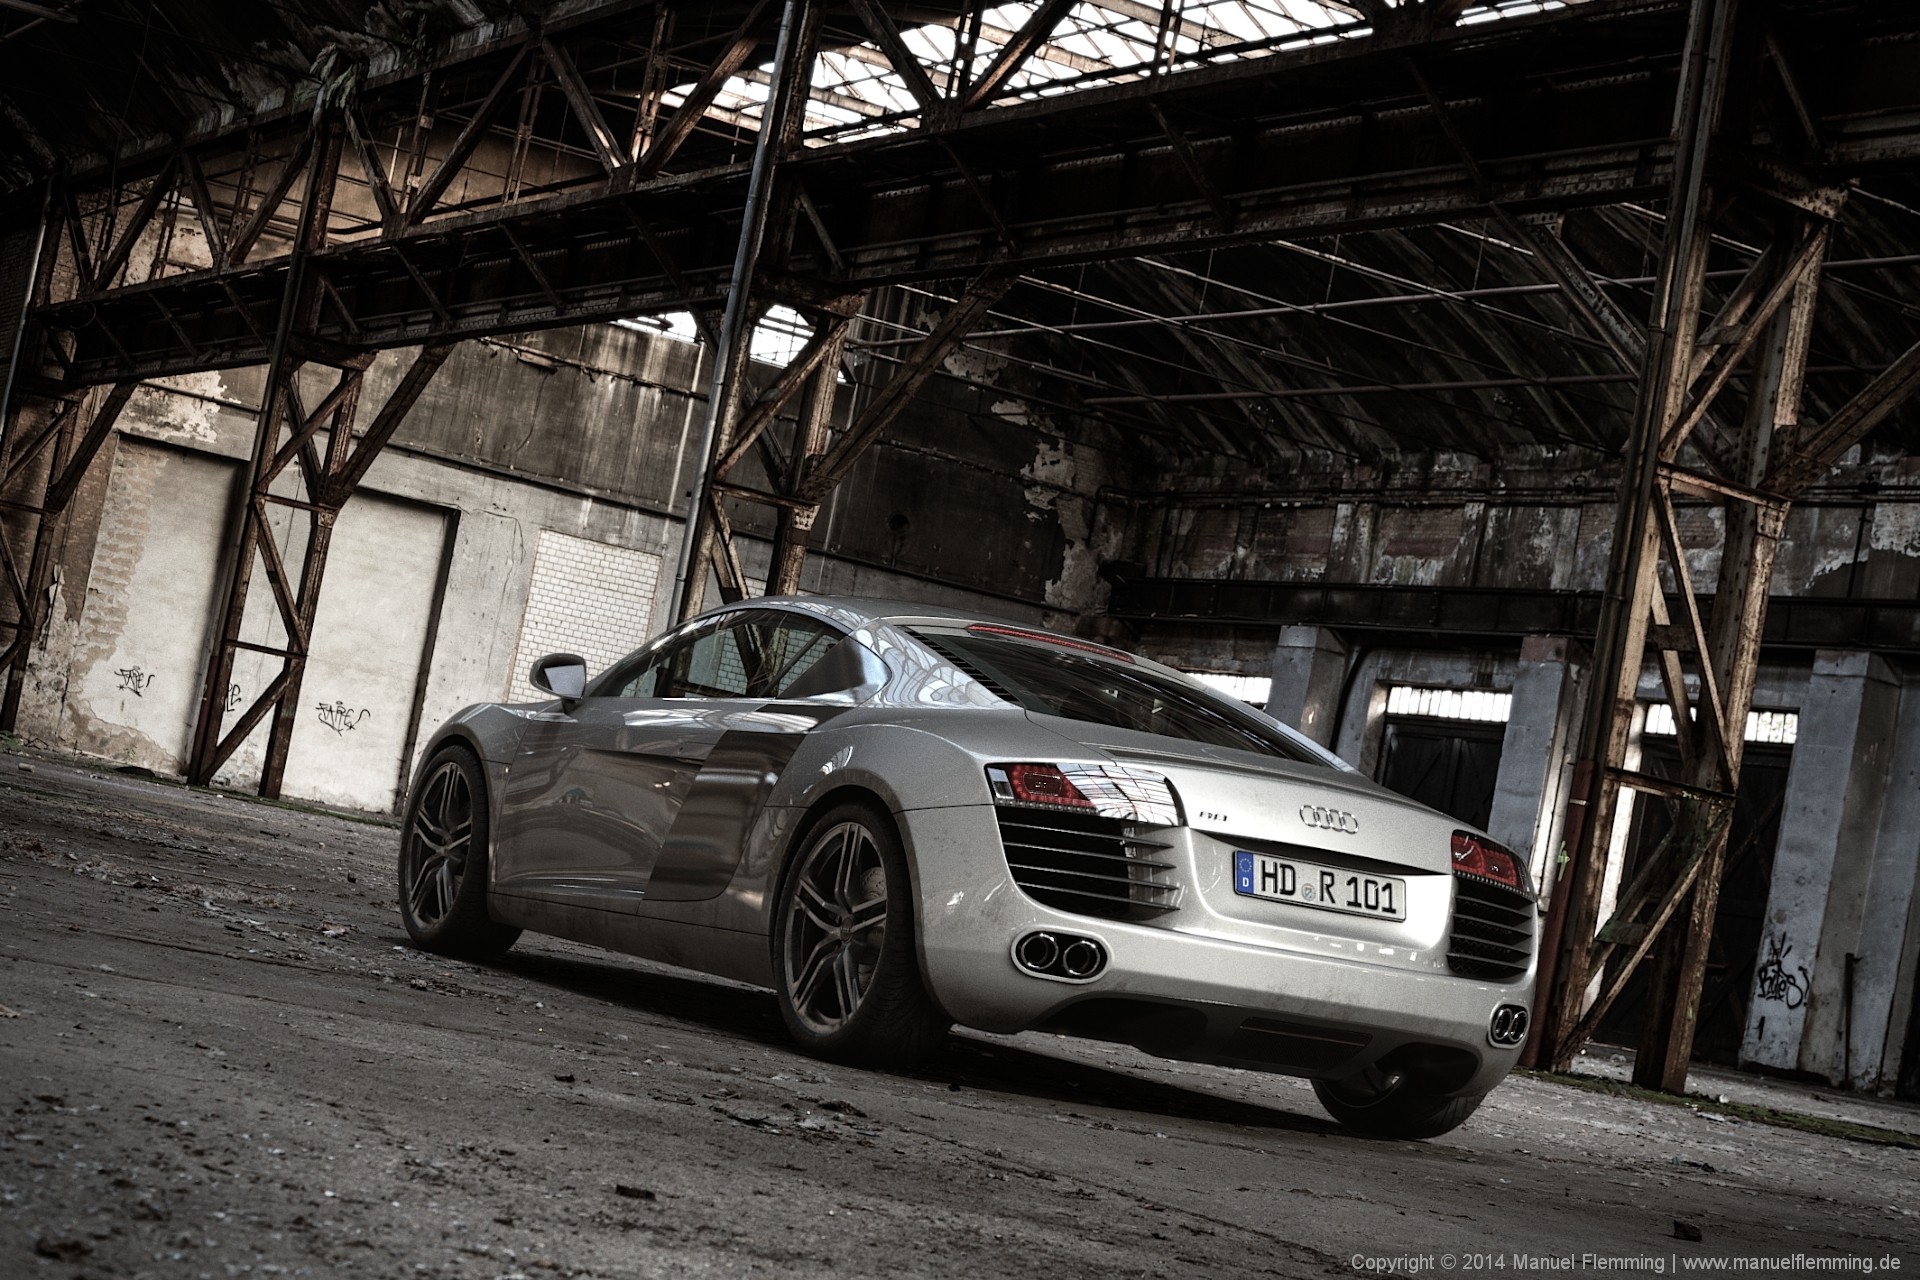 A rendering of an Audi R8 at Industrial Hall 01 - created using Maya, Mari, Vray and Nuke. I'm responsible for HDRI & Plate photography, texturing, shading, lighting, rendering and compositing.